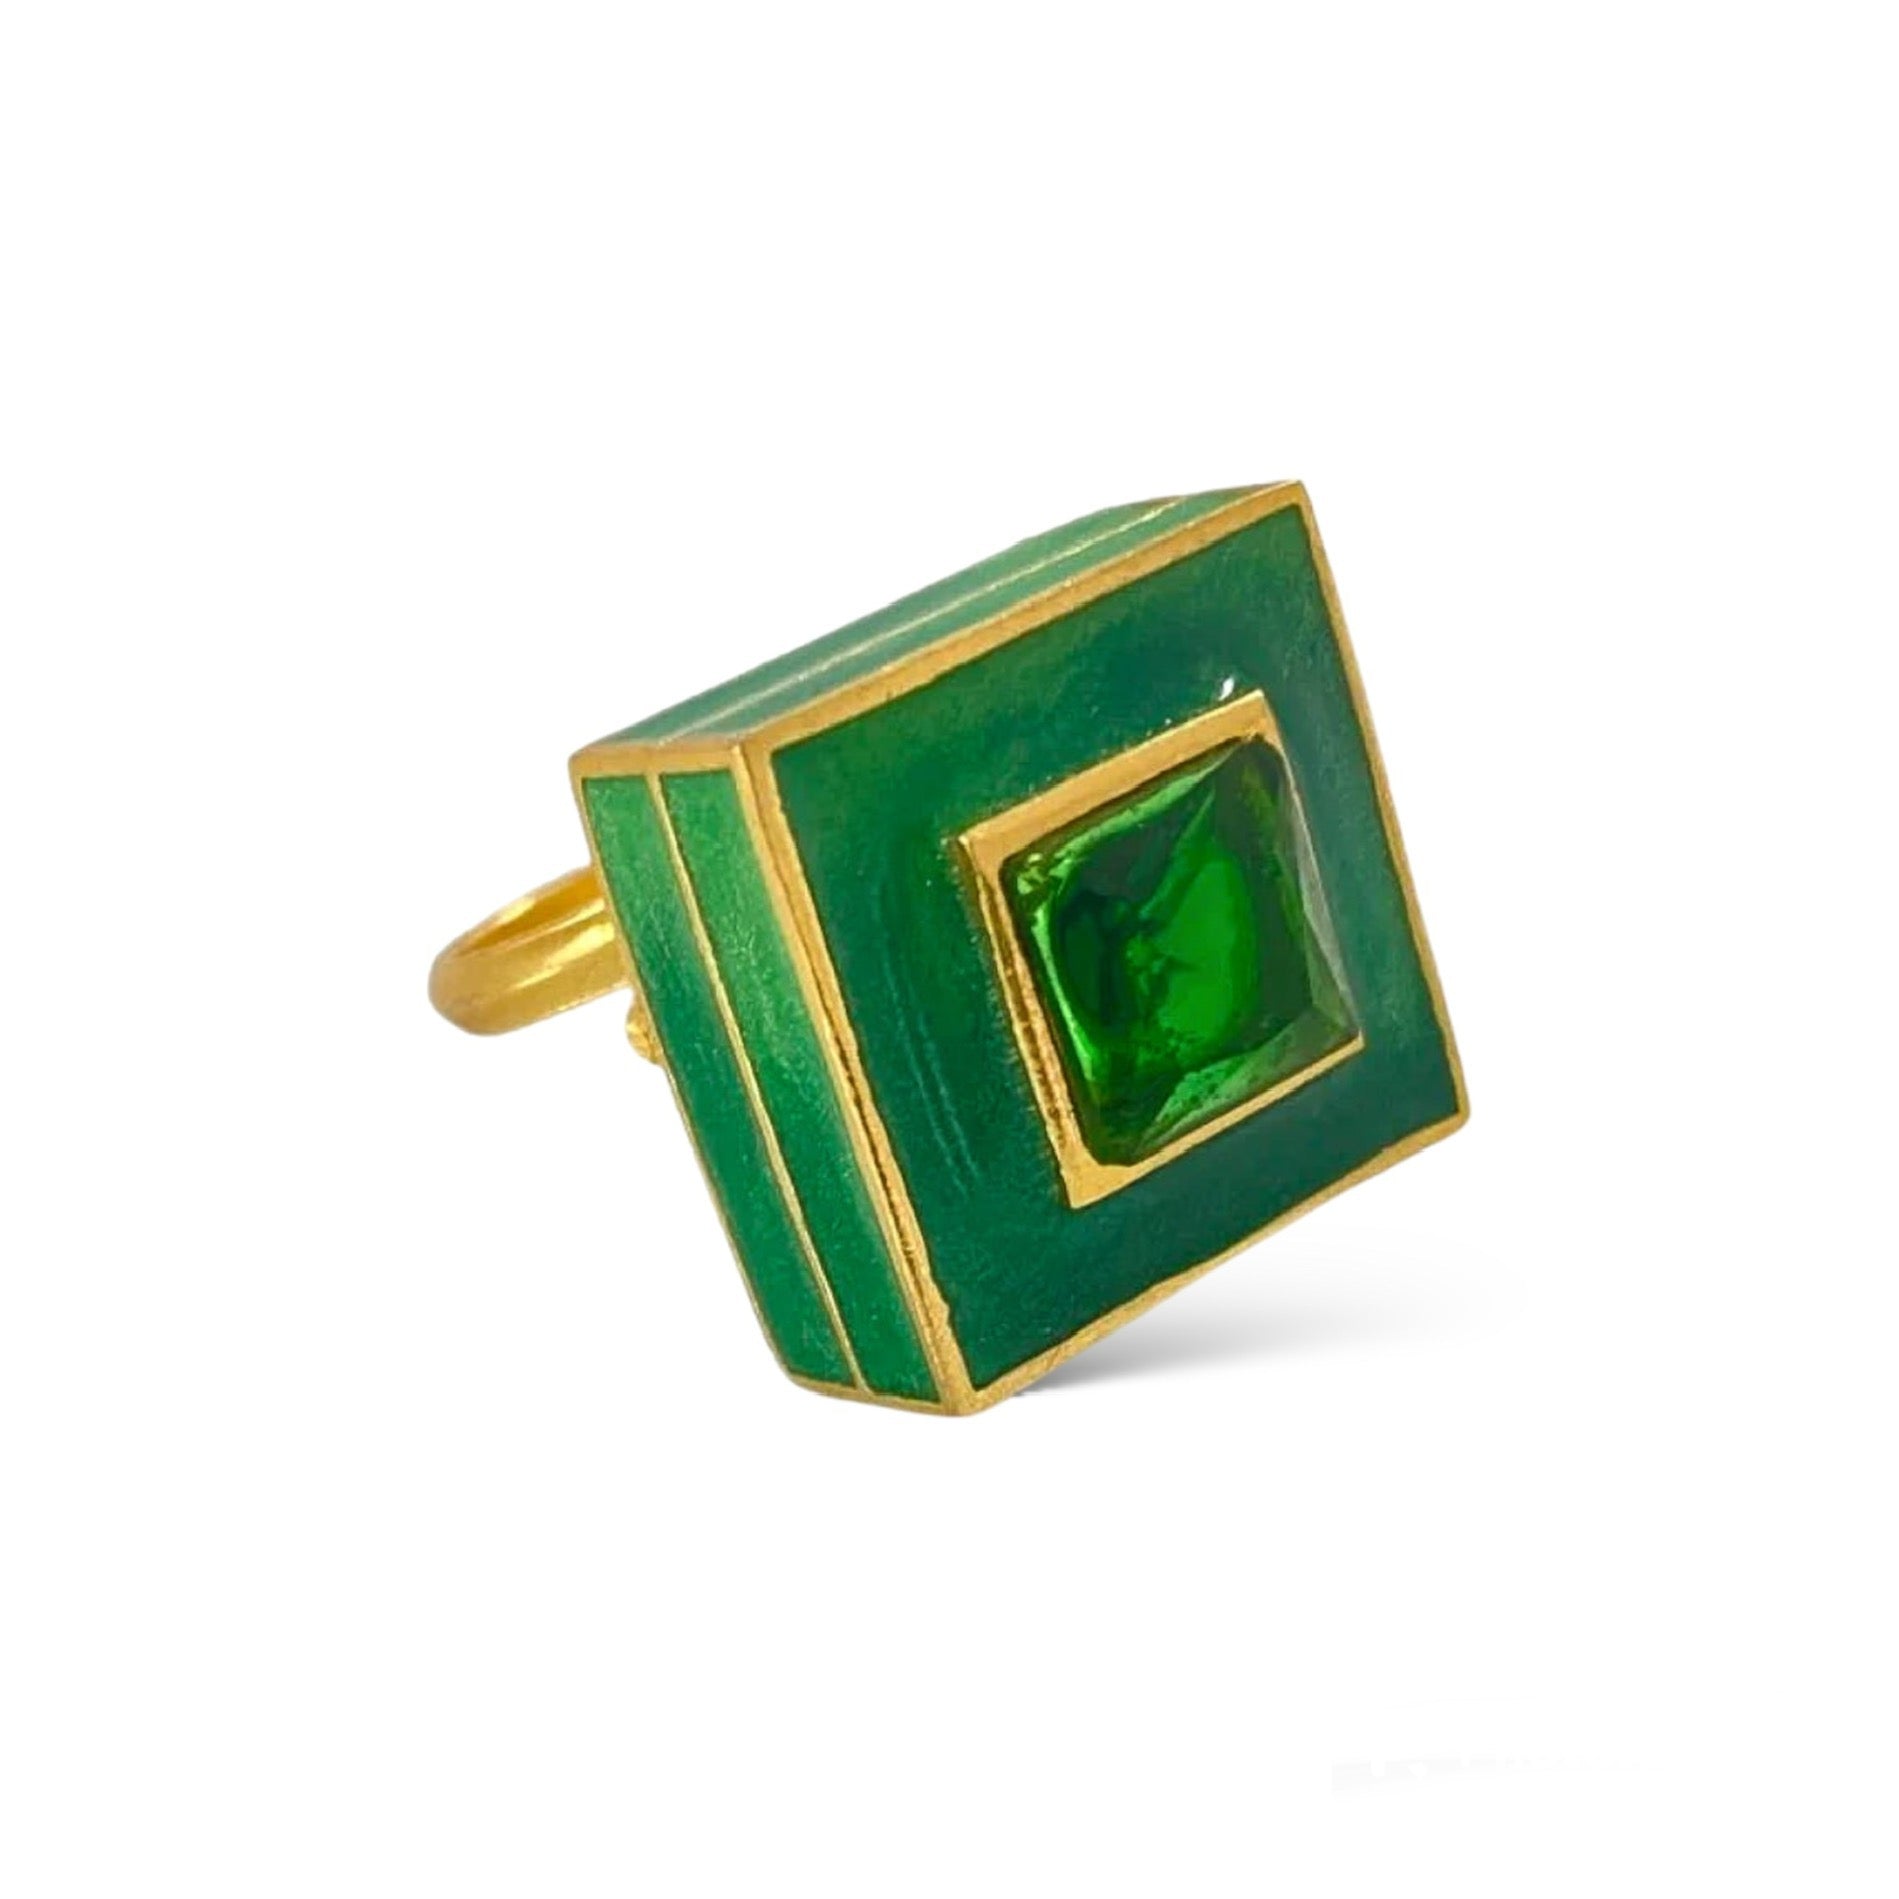 Layered Enamel and Crystal Square Ring - Designs by Uchita